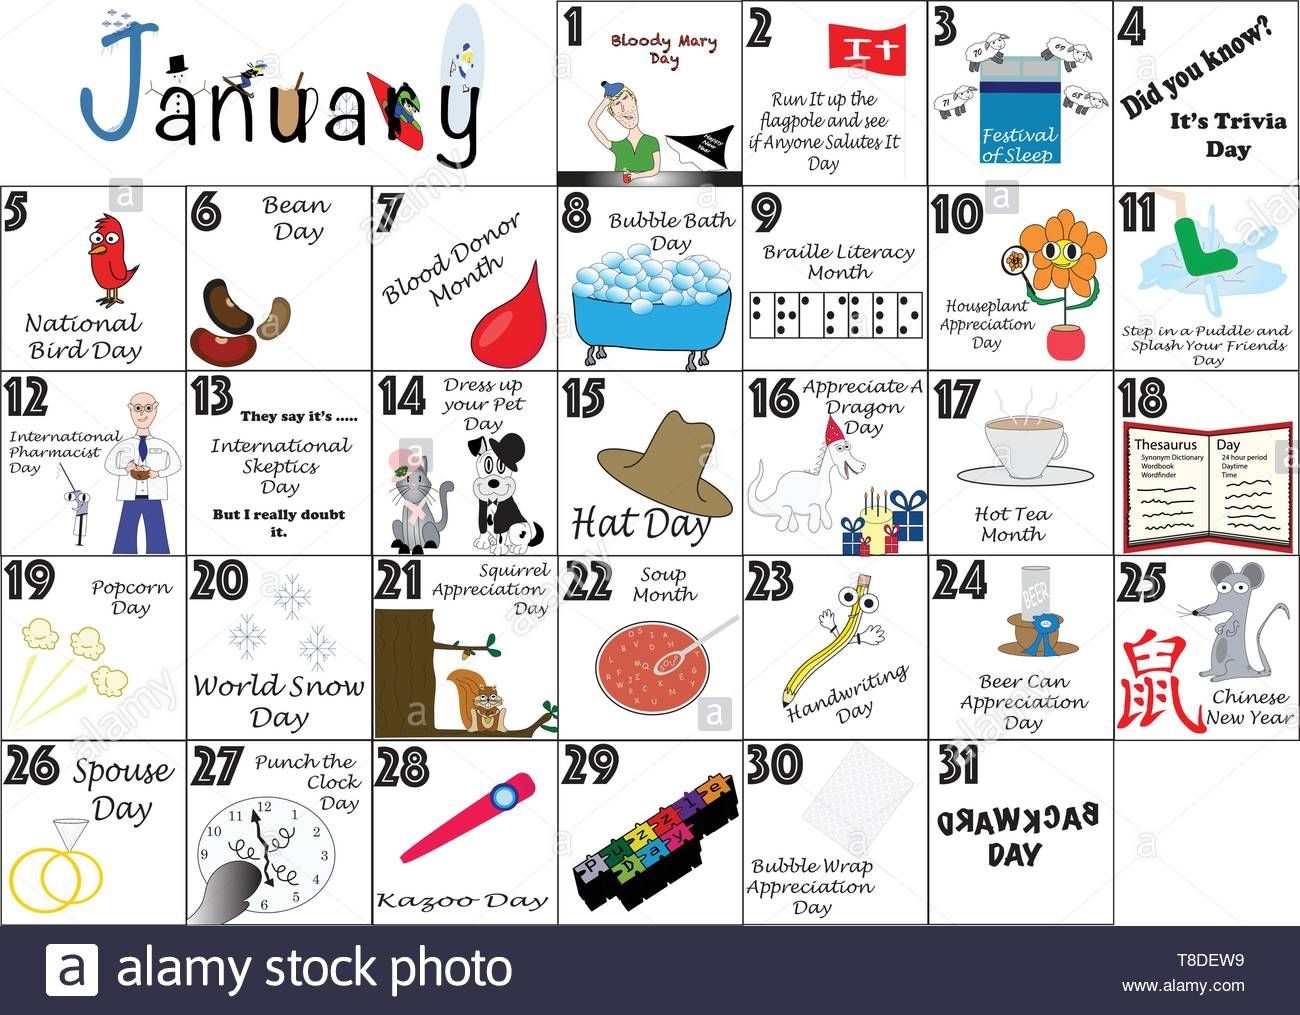 January 2020 Calendar Illustrated With Daily Quirky Holidays